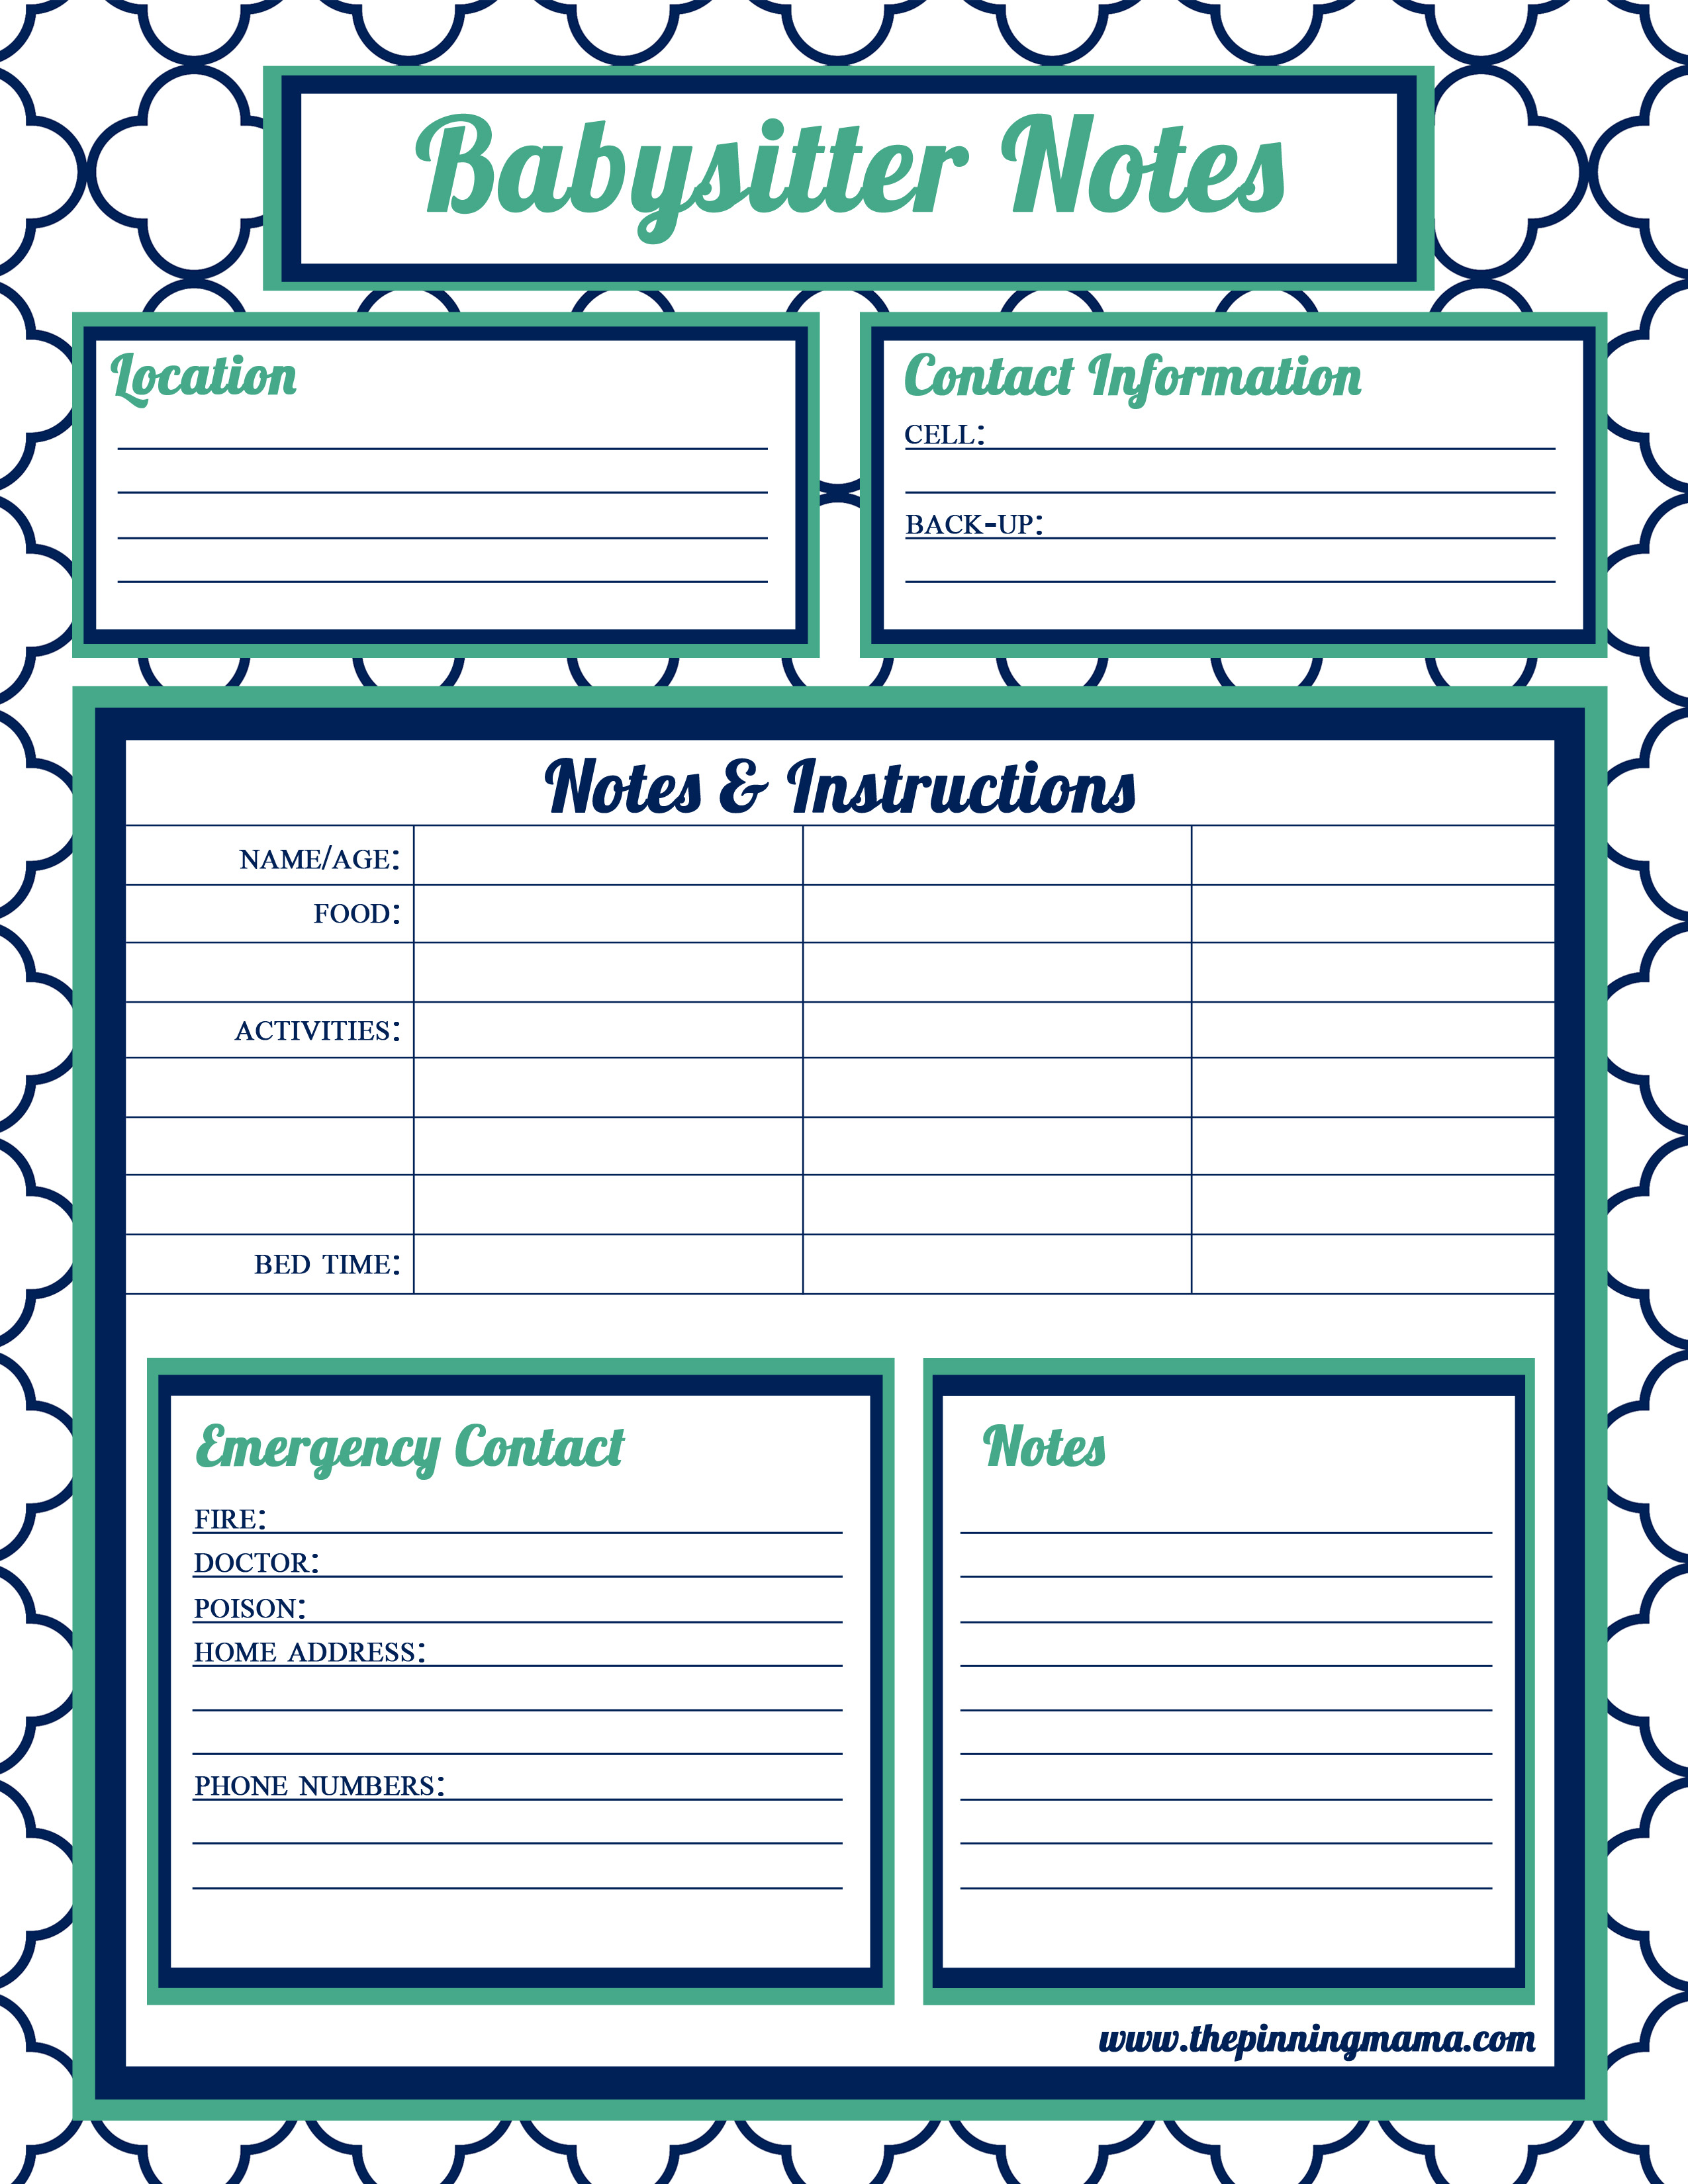 babysitting-forms-printable-printable-forms-free-online